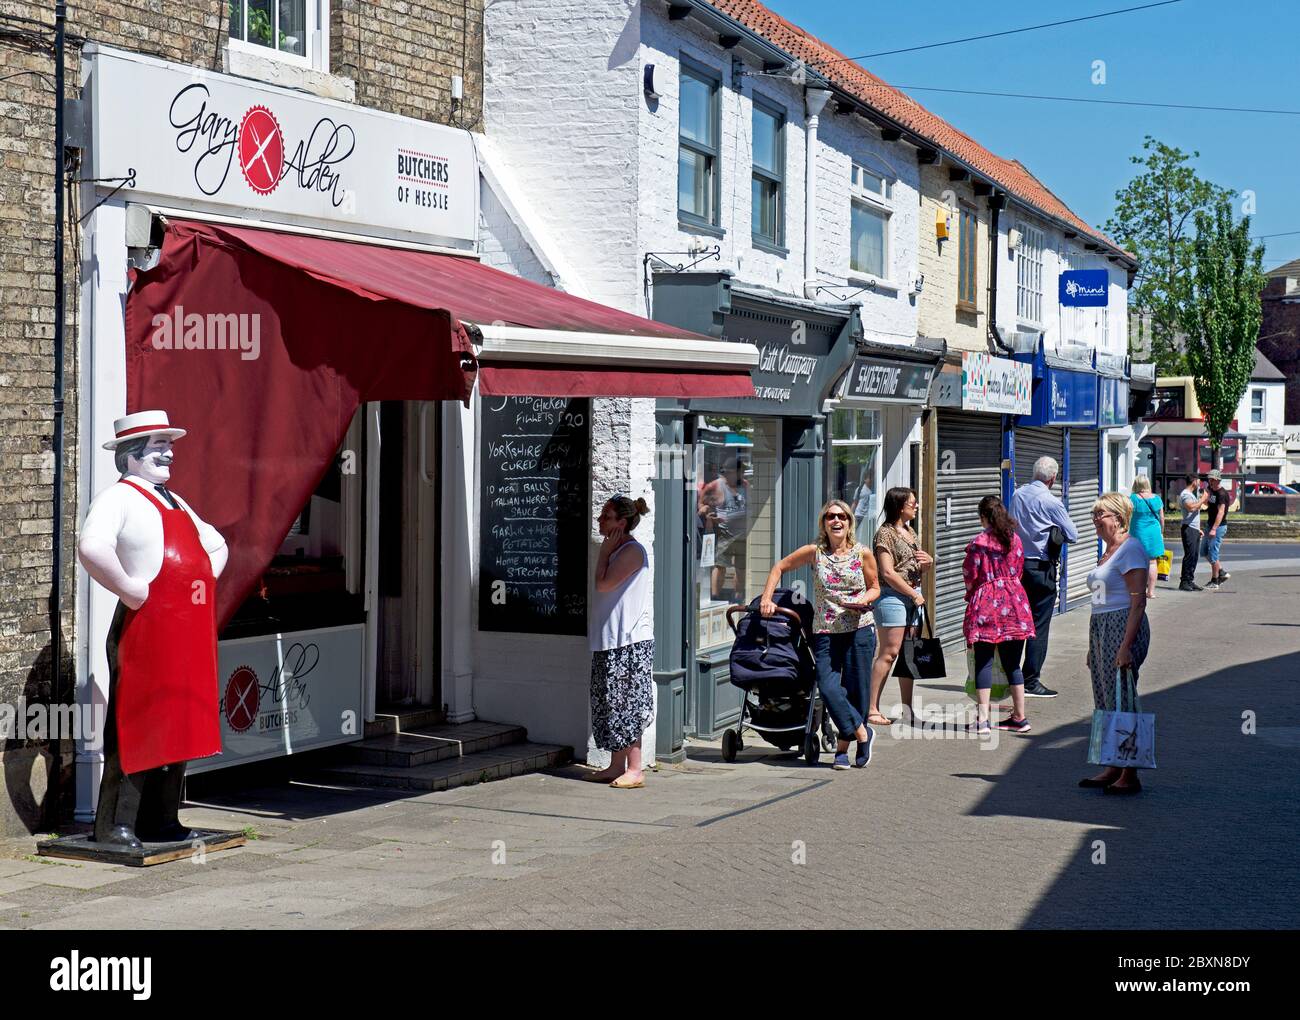 Customers queueing - social distancing - at a butchers shop in Hessle, near Hull, Humberside, East Yorkshire, England UK Stock Photo